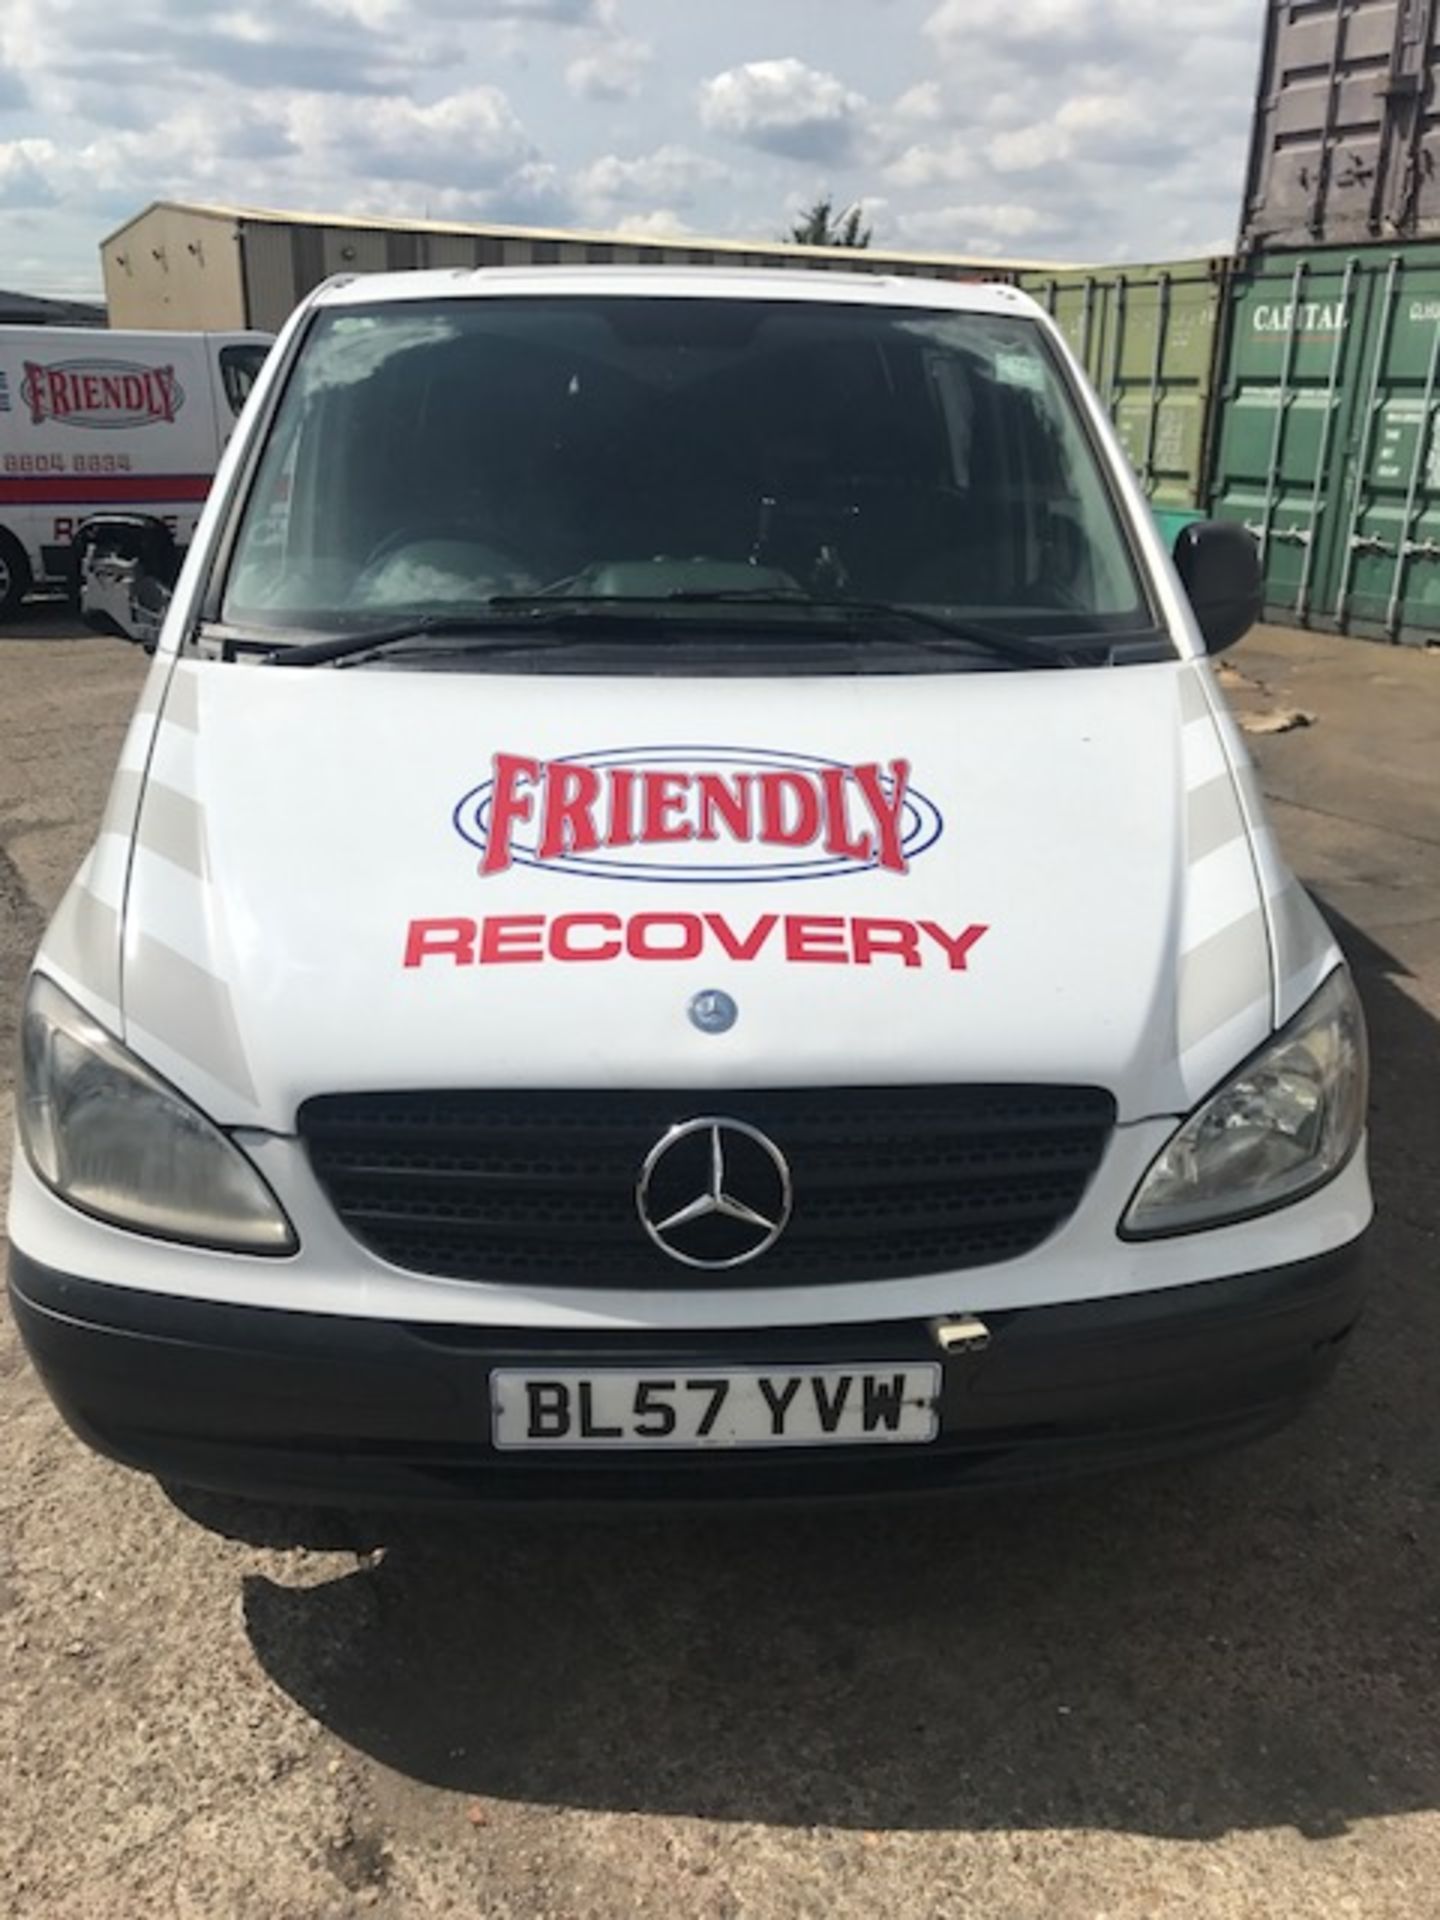 2007 Mercedes Vito crew cab five seater recovery and rescue vehicle complete with Mane LPD Limited - Image 3 of 14